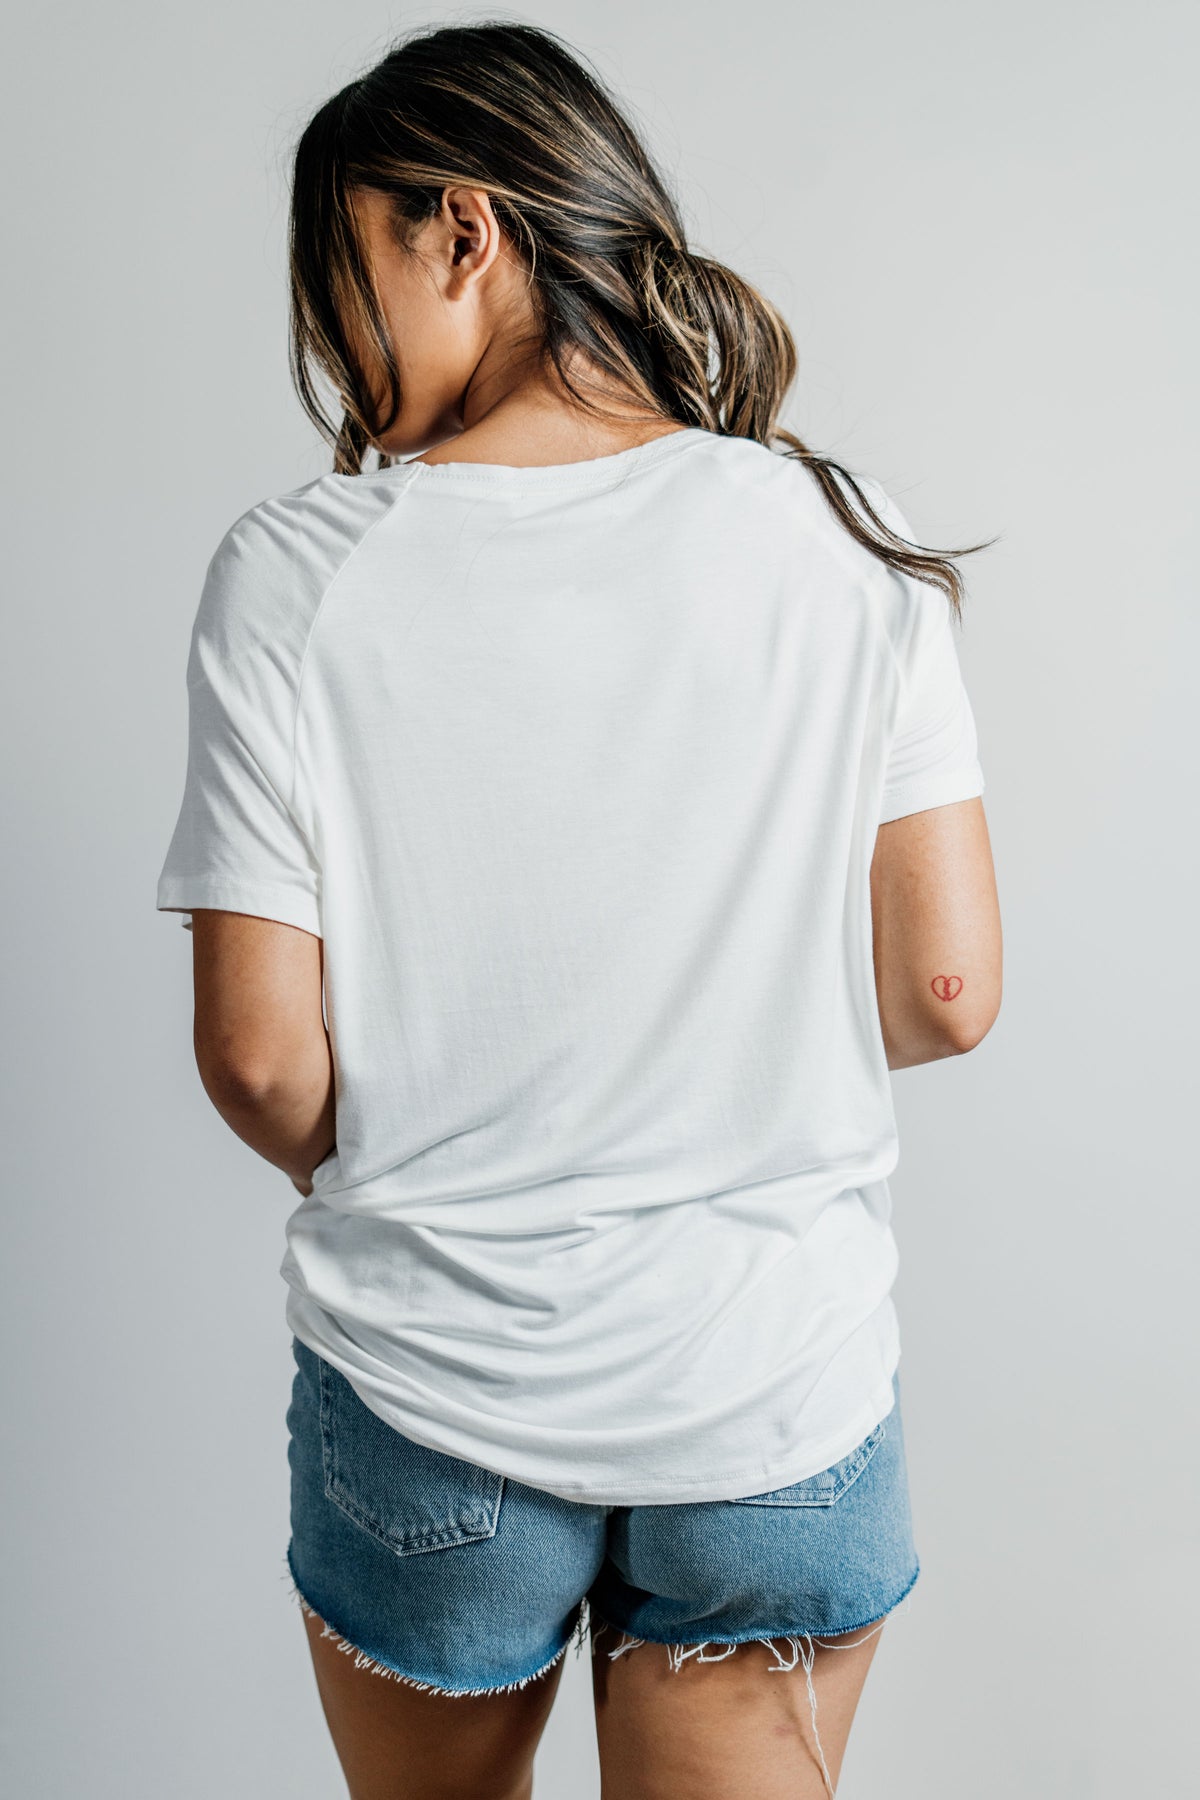 The Everyday T-Shirt